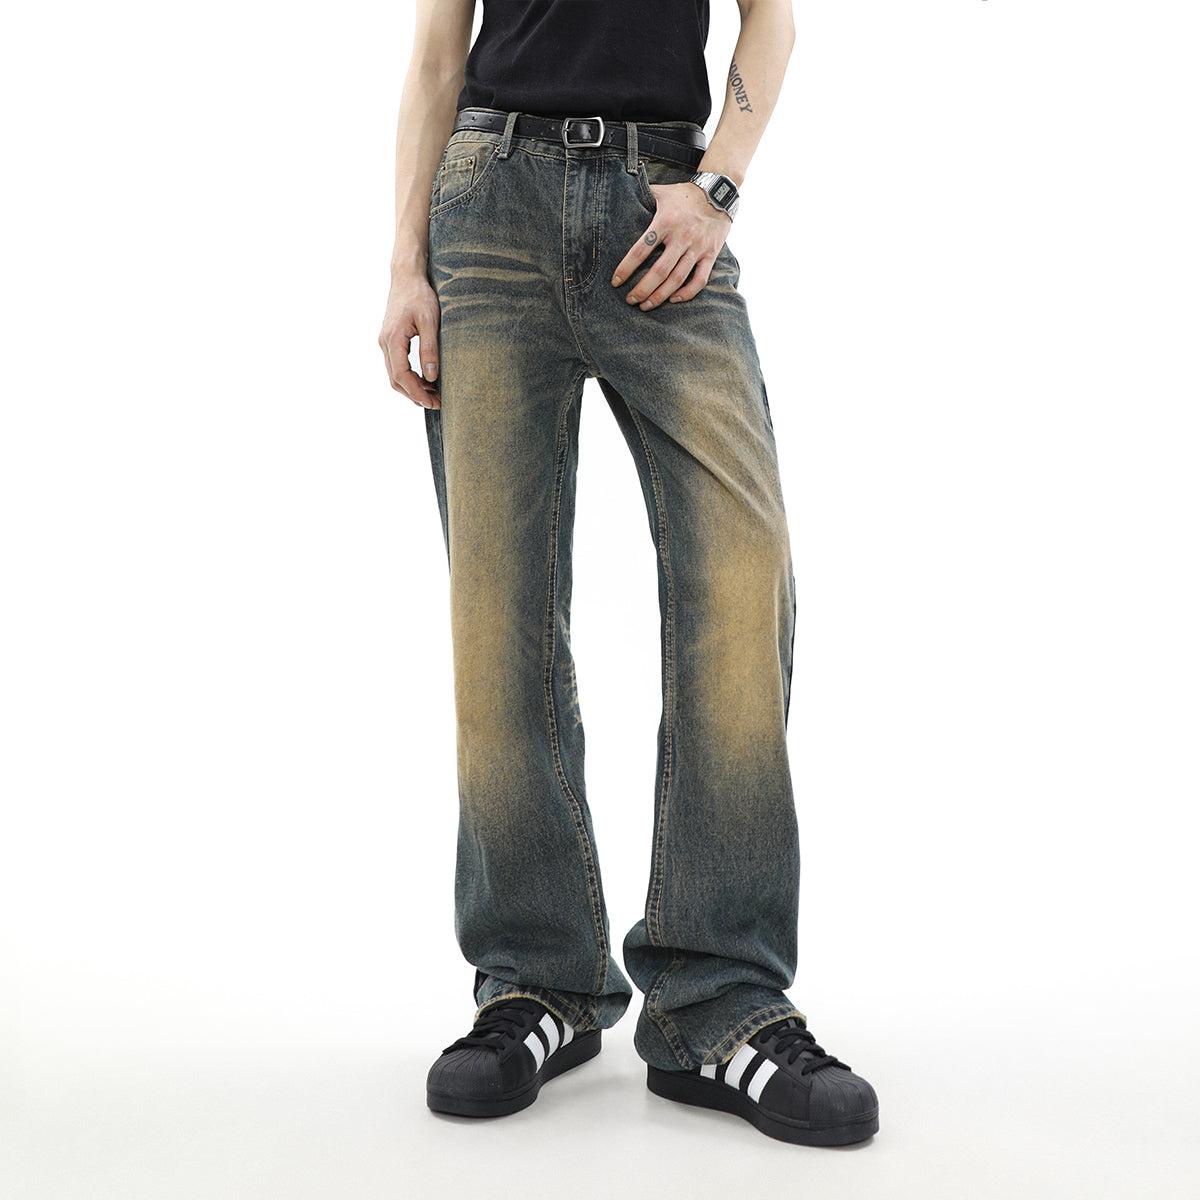 Mr Nearly Gradient Washed Ripped Pocket Jeans Korean Street Fashion Jeans By Mr Nearly Shop Online at OH Vault